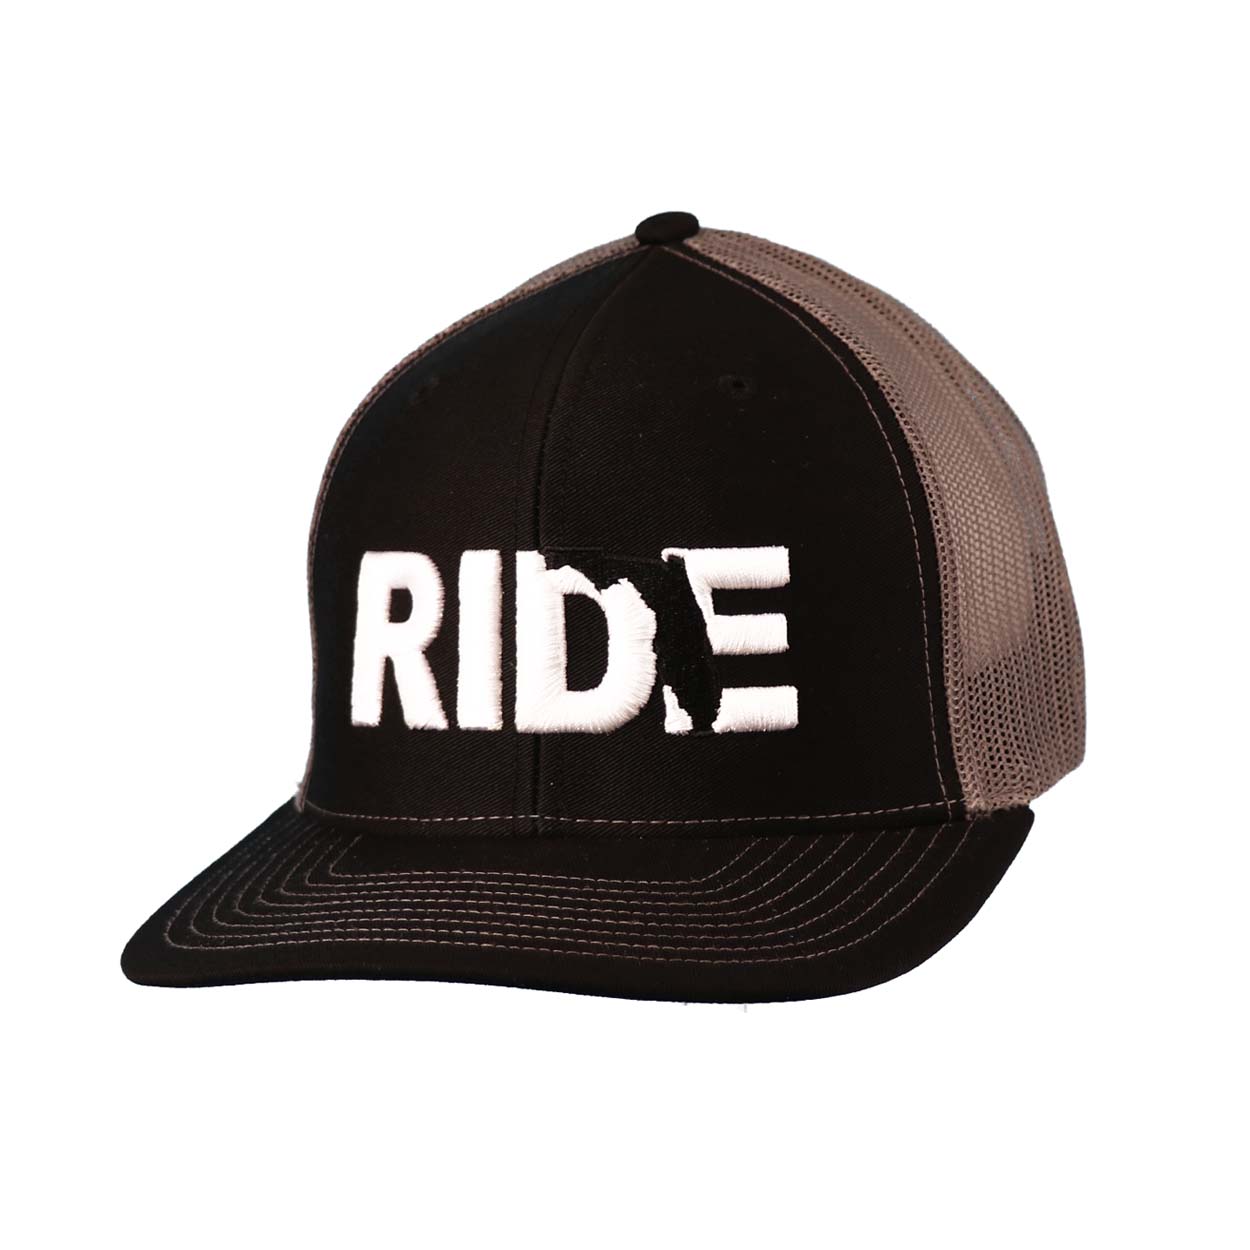 Ride Florida Classic Pro 3D Puff Embroidered Snapback Trucker Hat Black/Gray